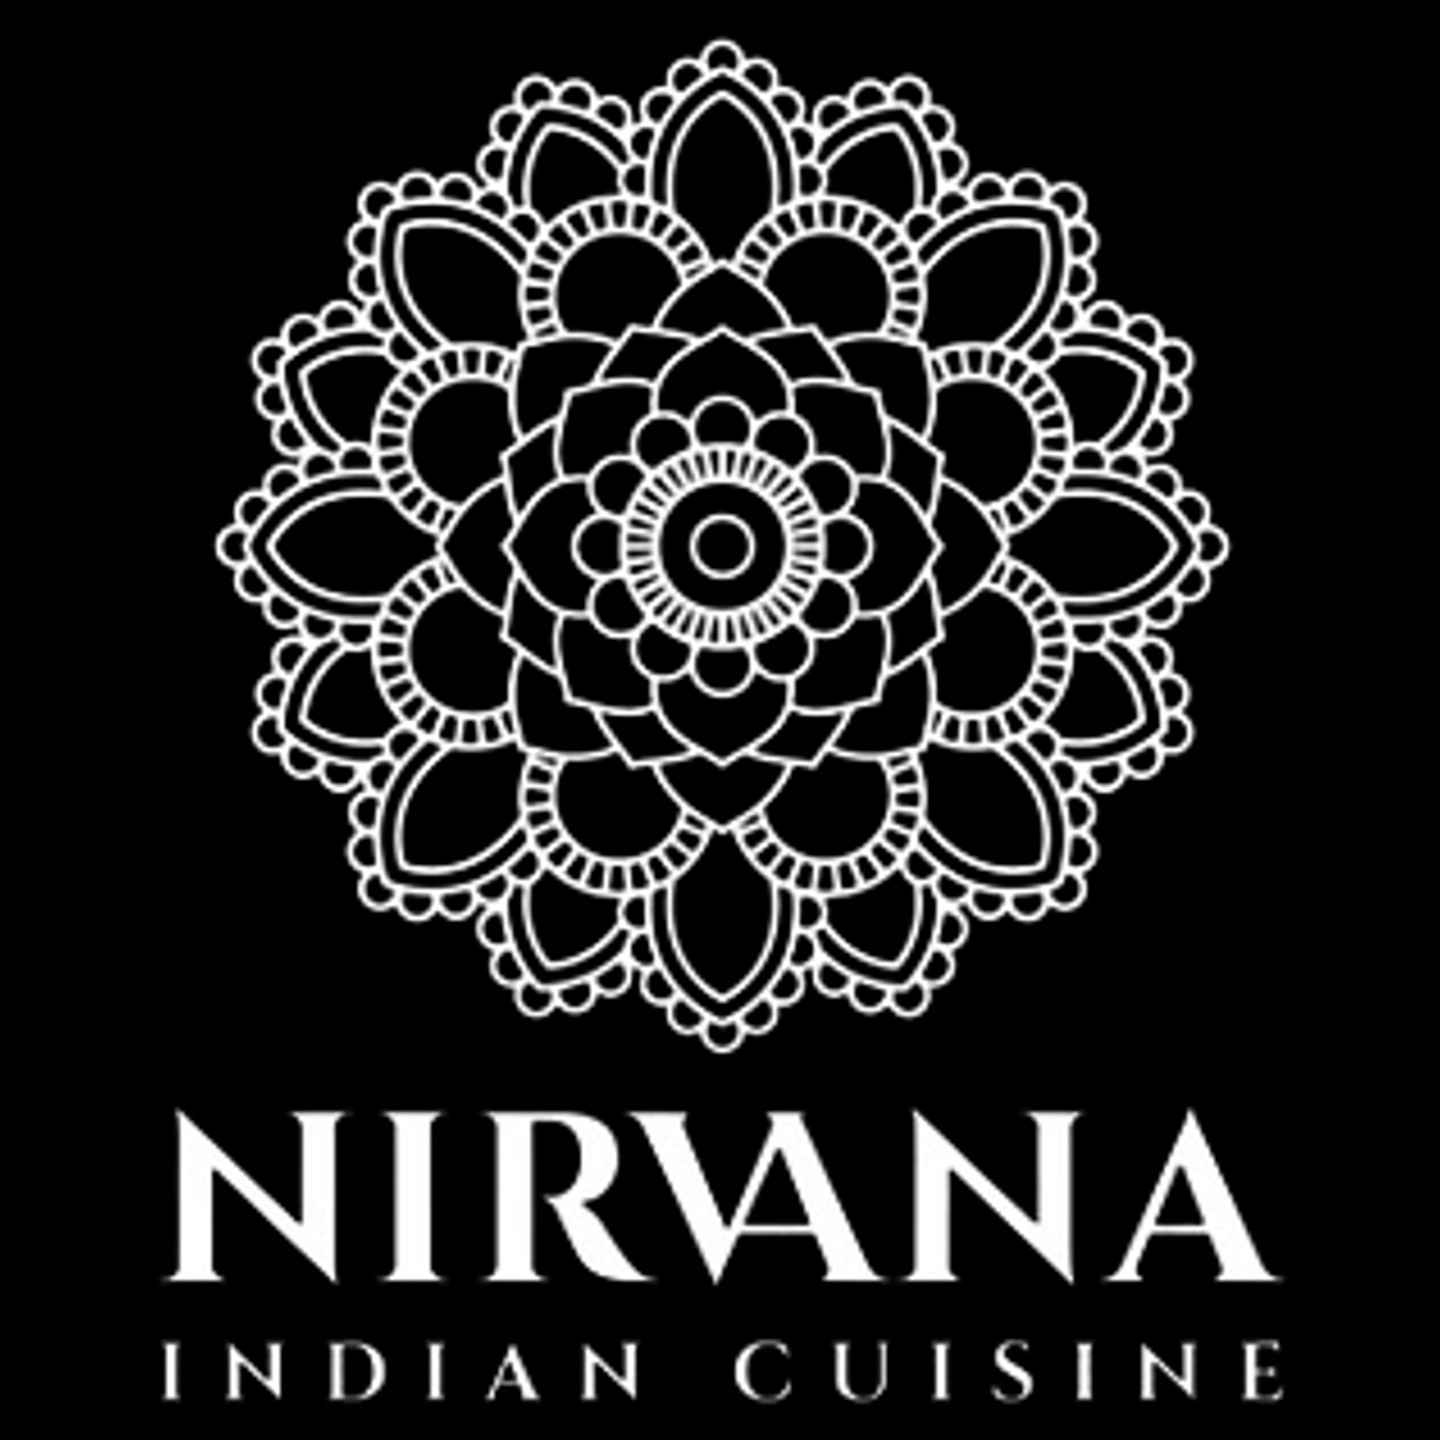 Welcome to Nirvana Indian Cuisine